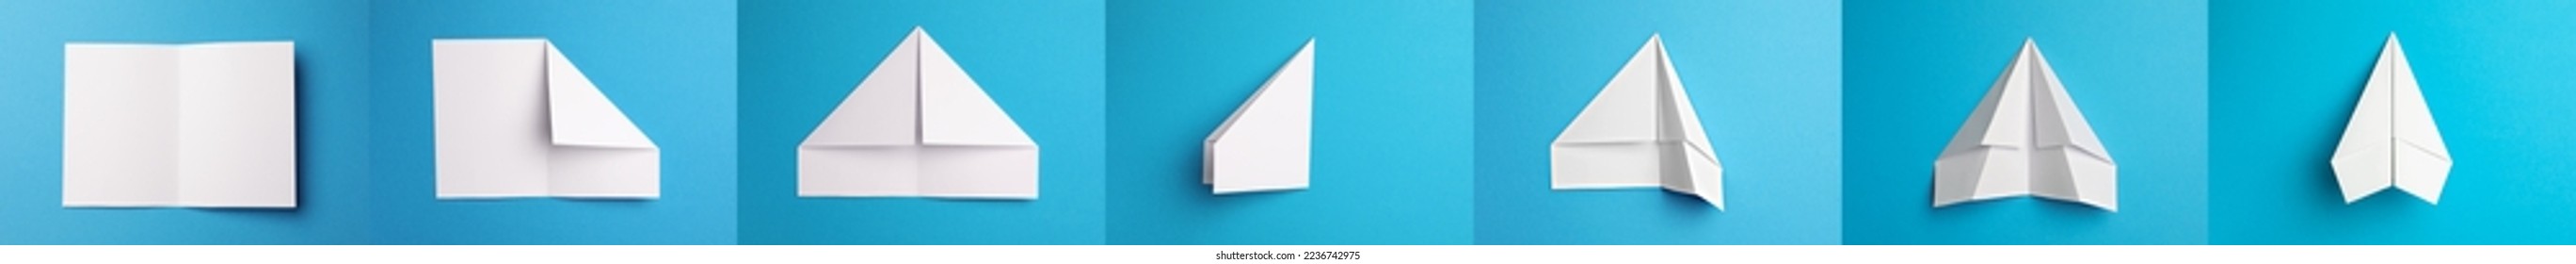 How to make paper plane: step by step instruction. Collage with photos of folded white paper sheets on light blue background, top view. Banner design